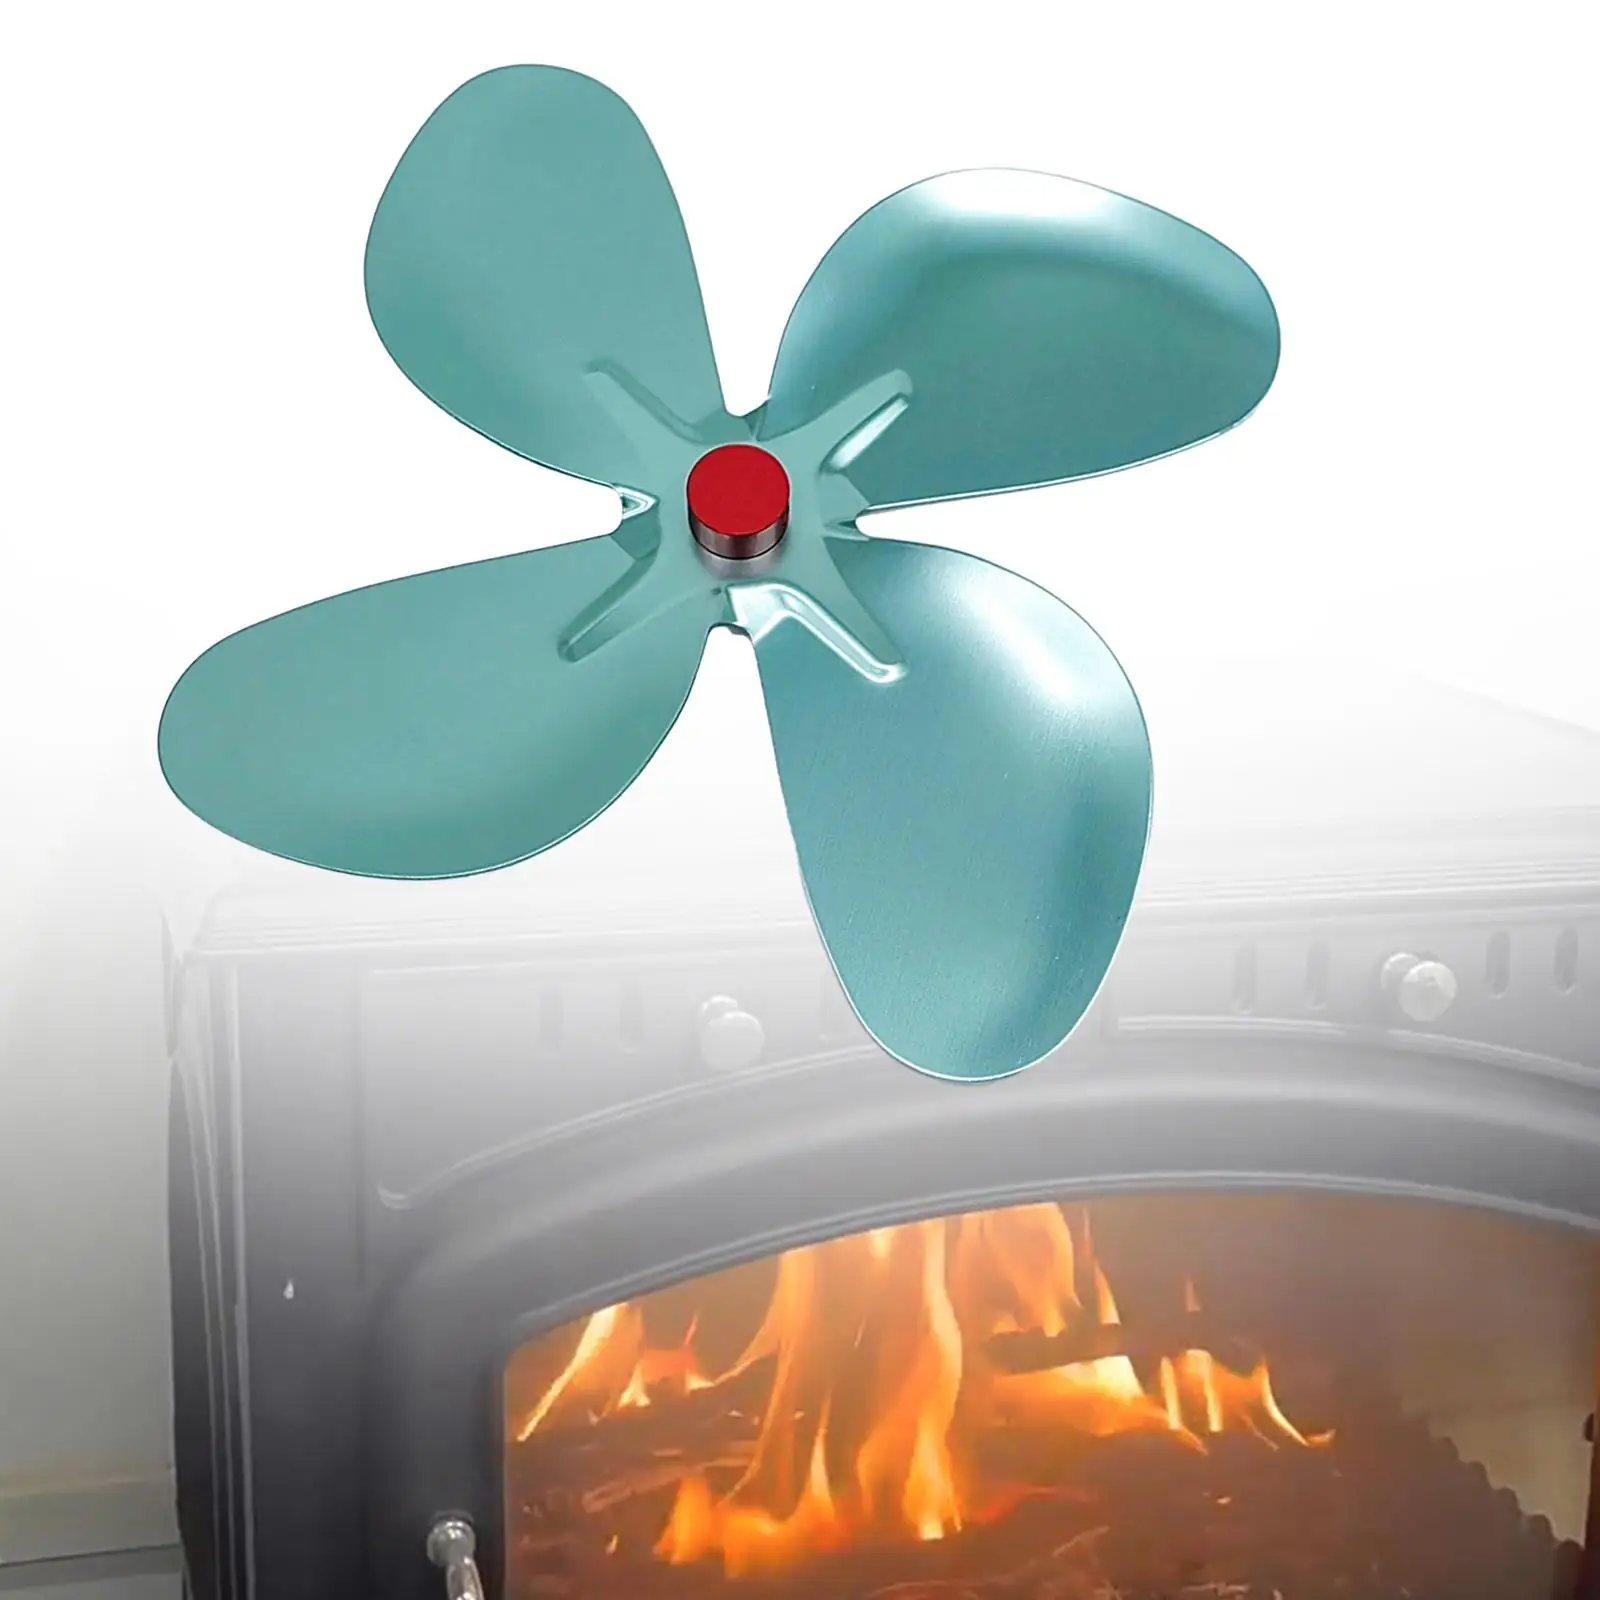 Stoves Fan Blade 4 Balde Quiet Fireplace 175mm Circulating Warm Fan with Screws and Screwdriver Fan Blade Replacement